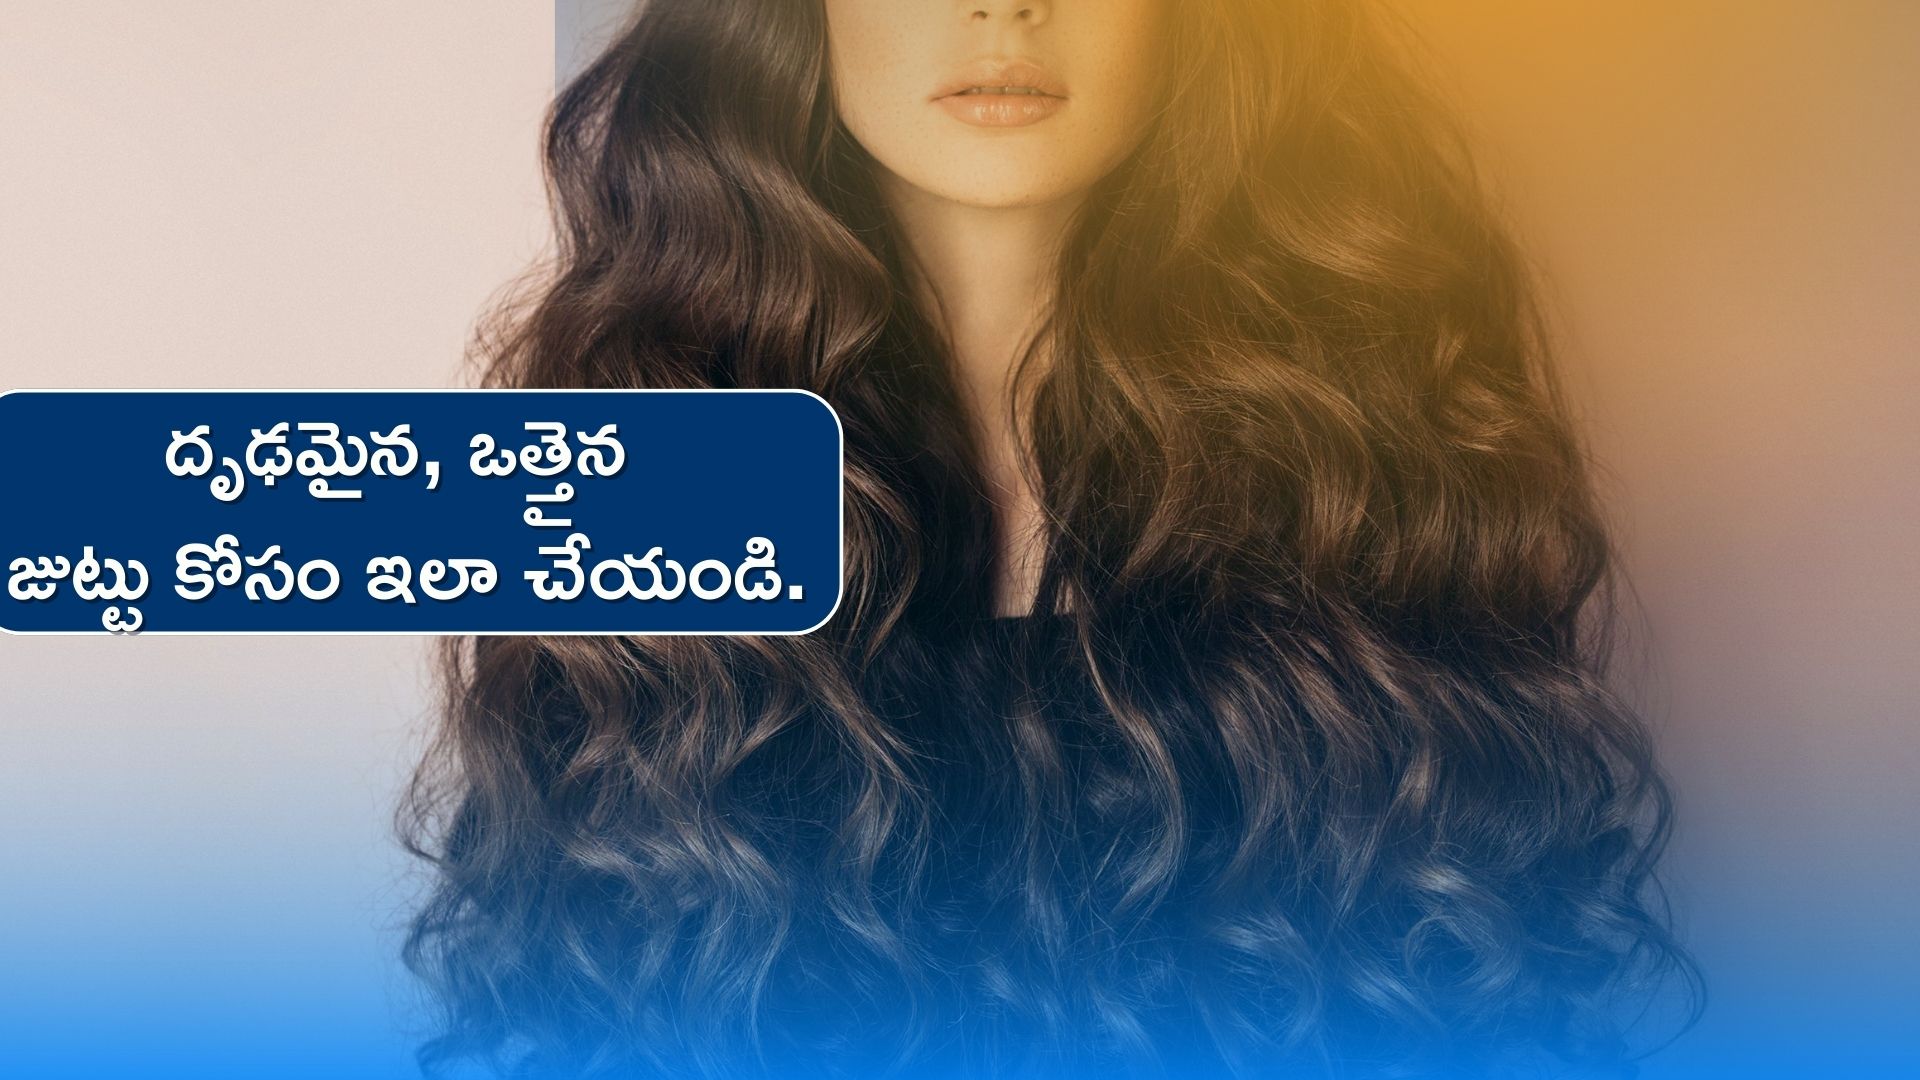 Vegetables For Hair Growth In 14 Days: Spinach Carrot And Beans In Diet Can  Make Hair Strong And Thick In Just 14 Days | Hair Care Tips: మీరు అనుకొని  ఉంటారా.. వీటిని తింటే